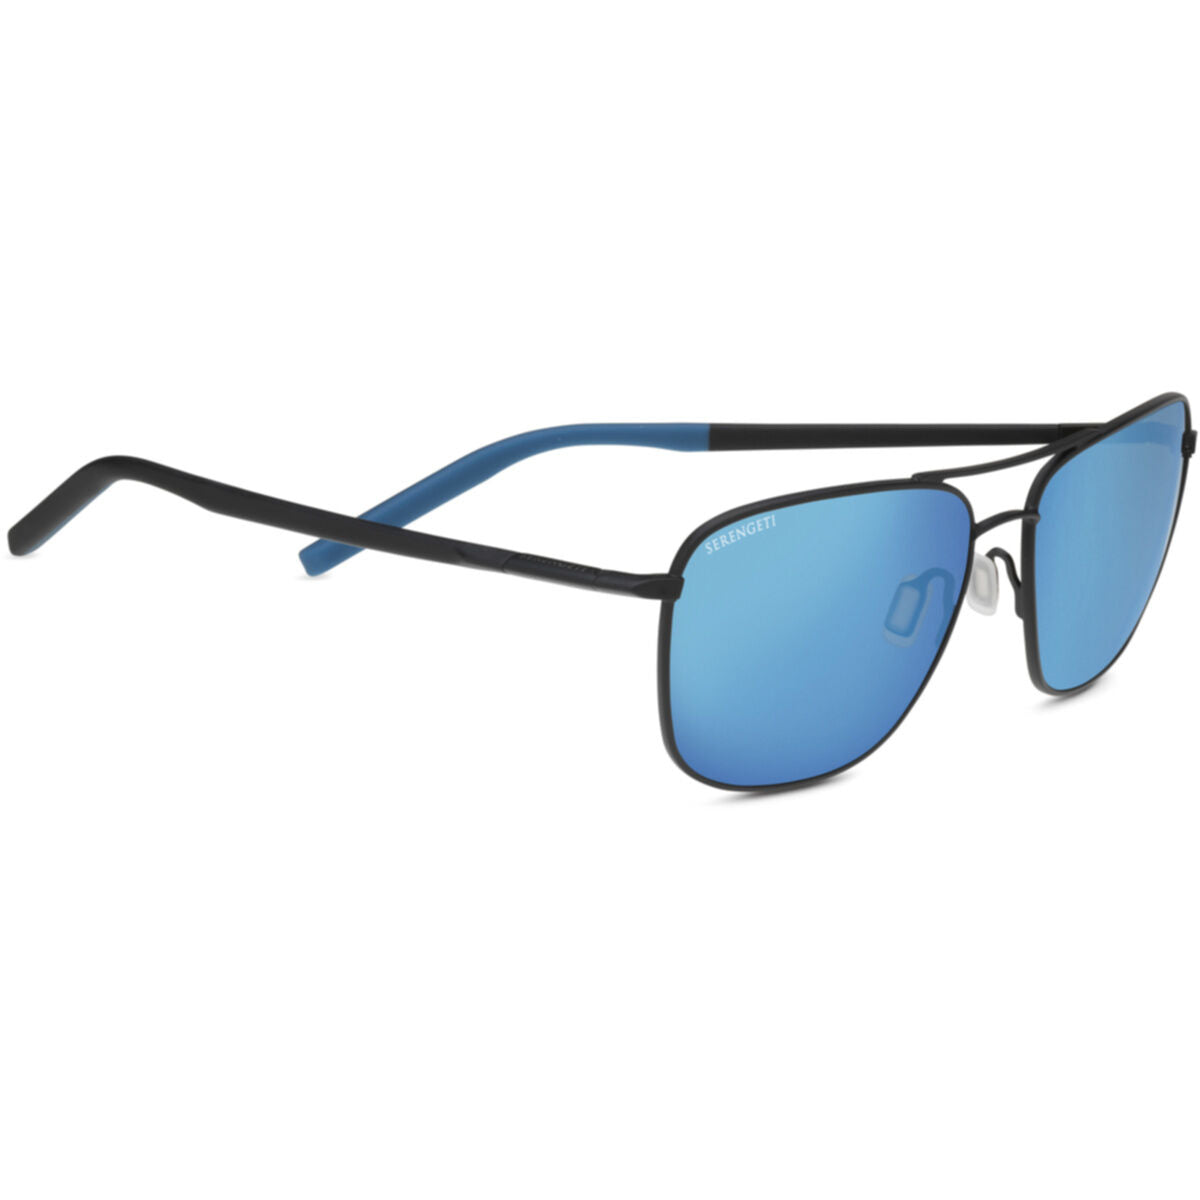 Serengeti Spello Sunglasses  Matte Black With Black Temples And Blue Inside Temple Tips One Size